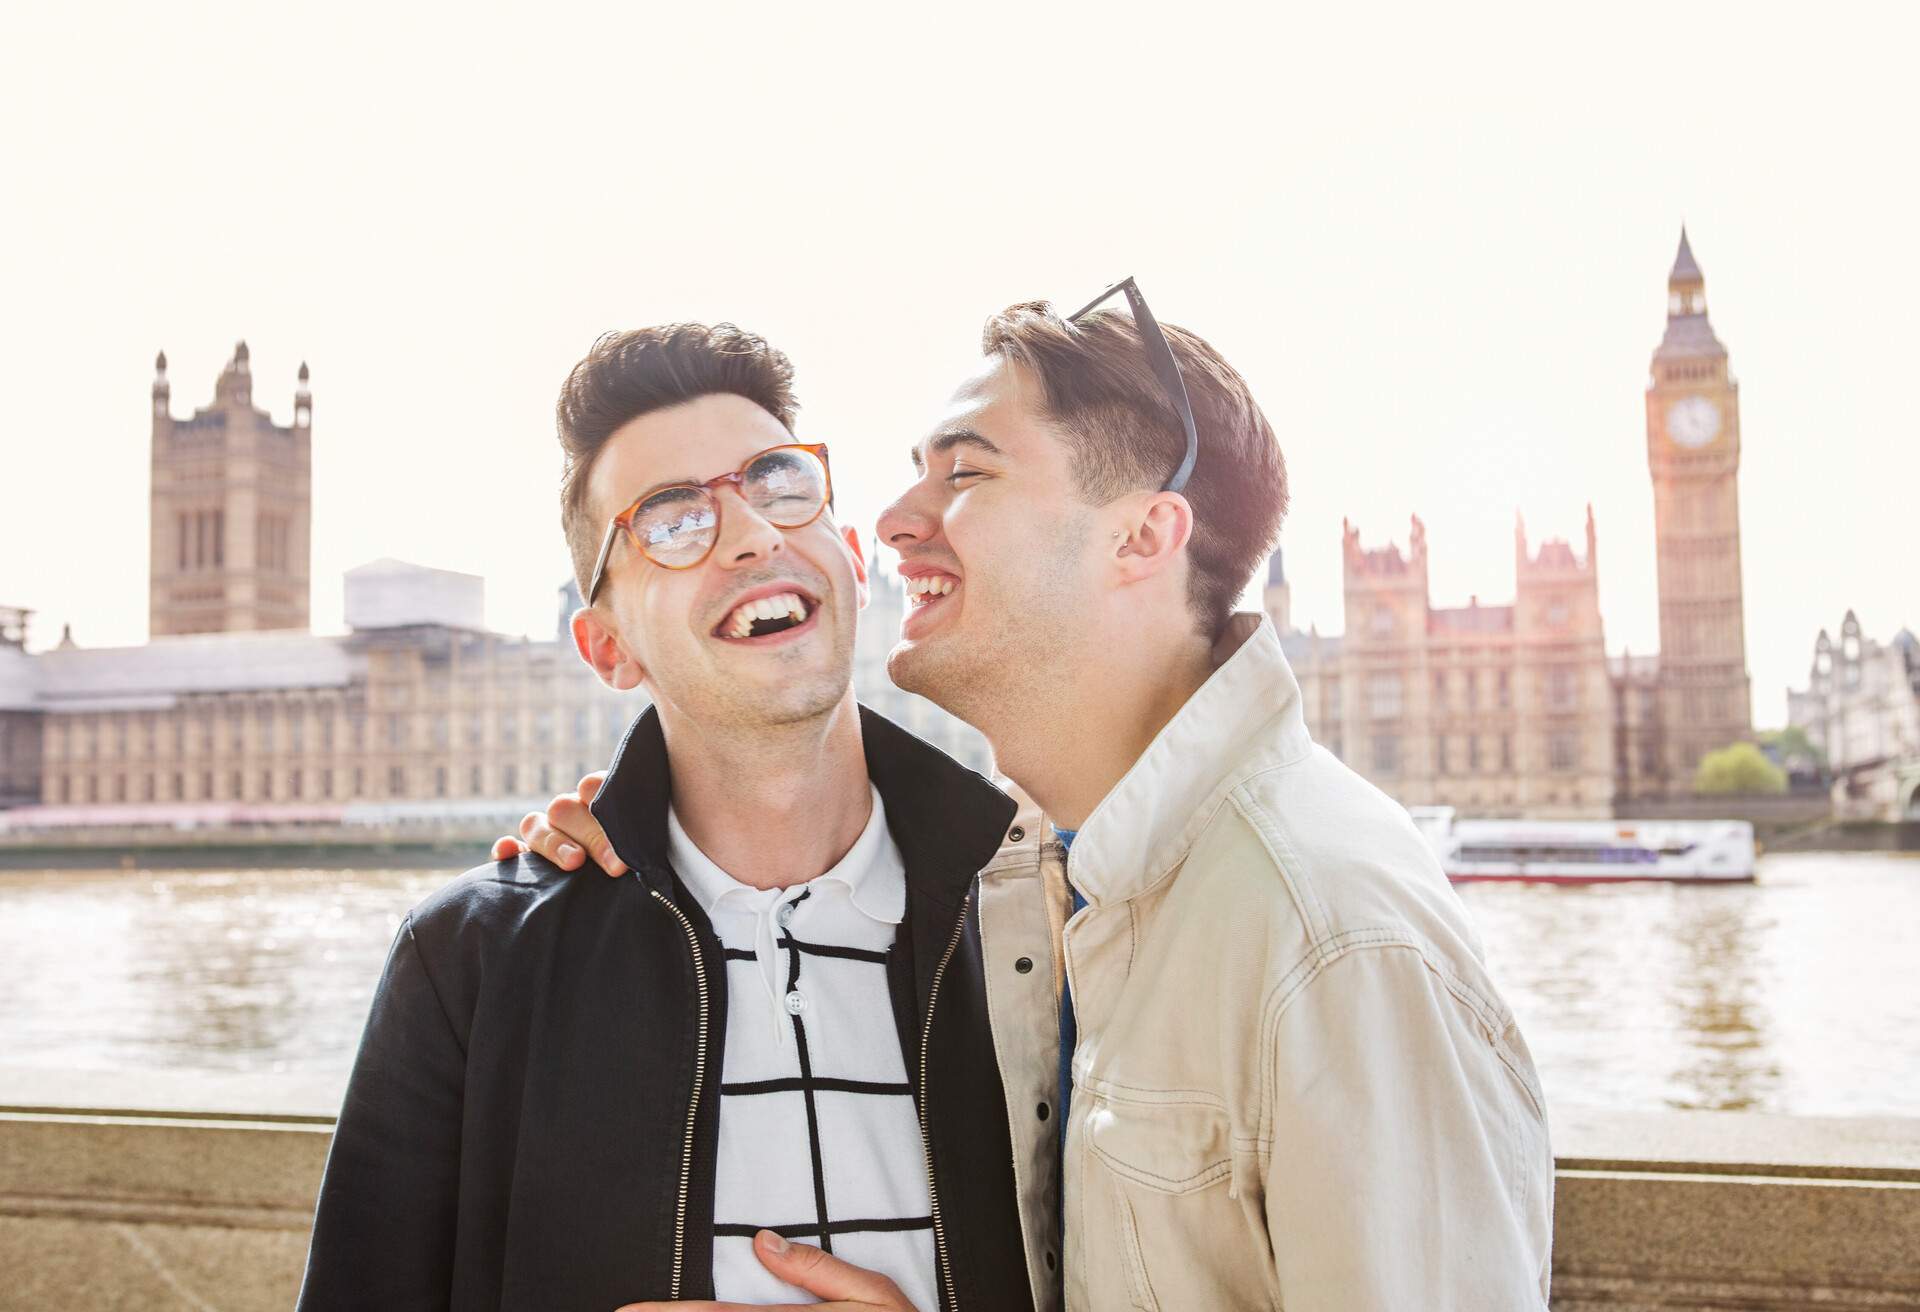 Male couple in black and white jackets laugh while one of them has his arms over the other's shoulder.